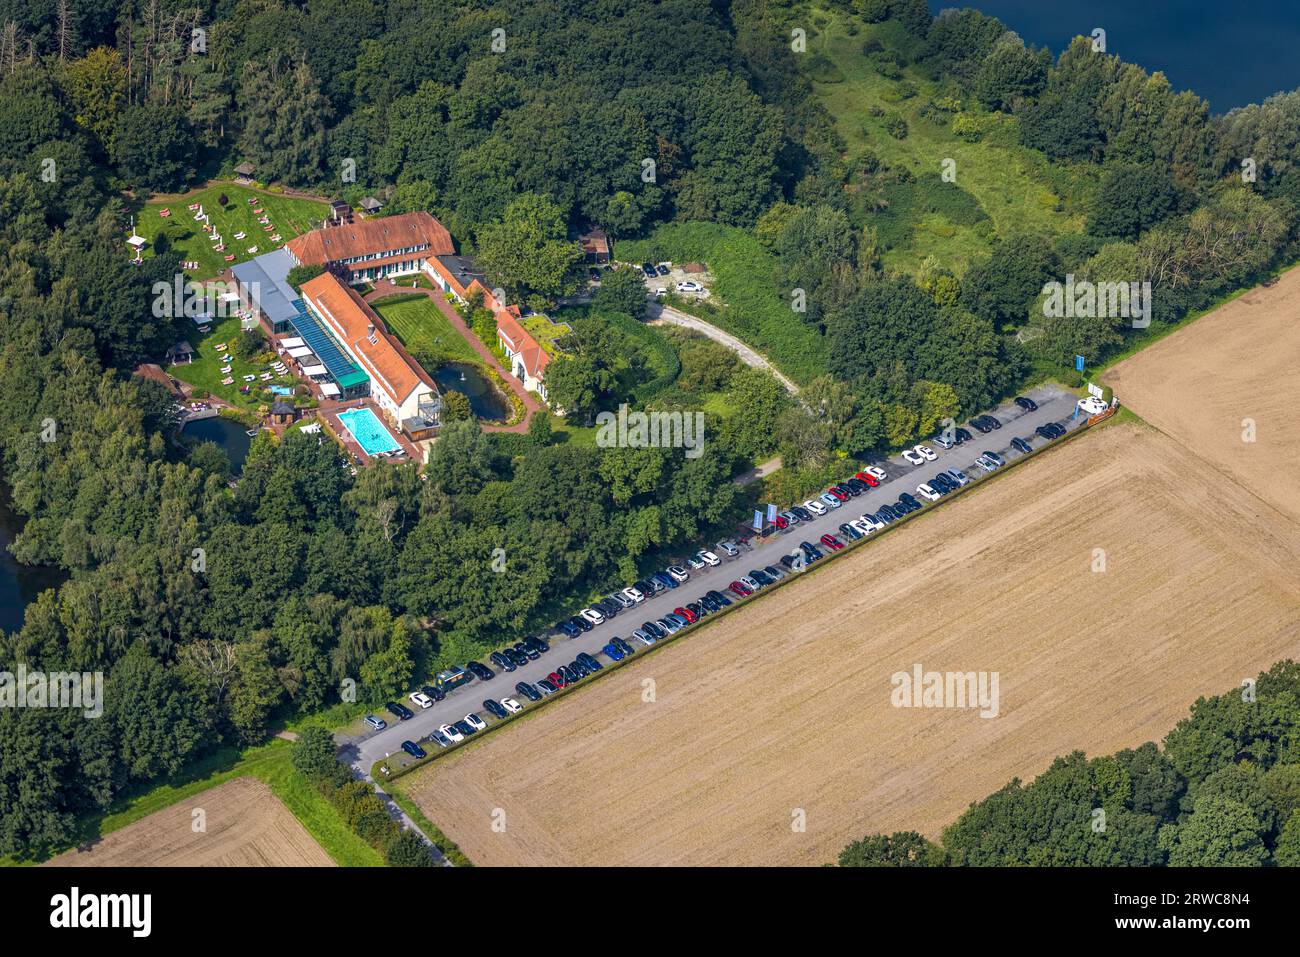 Aerial view, Gut Sternholz Hamm, hotel and wellness and sunbathing lawn, Haarener Baggerseen landscape conservation area, Uentrop, Hamm, Ruhr area, No Stock Photo